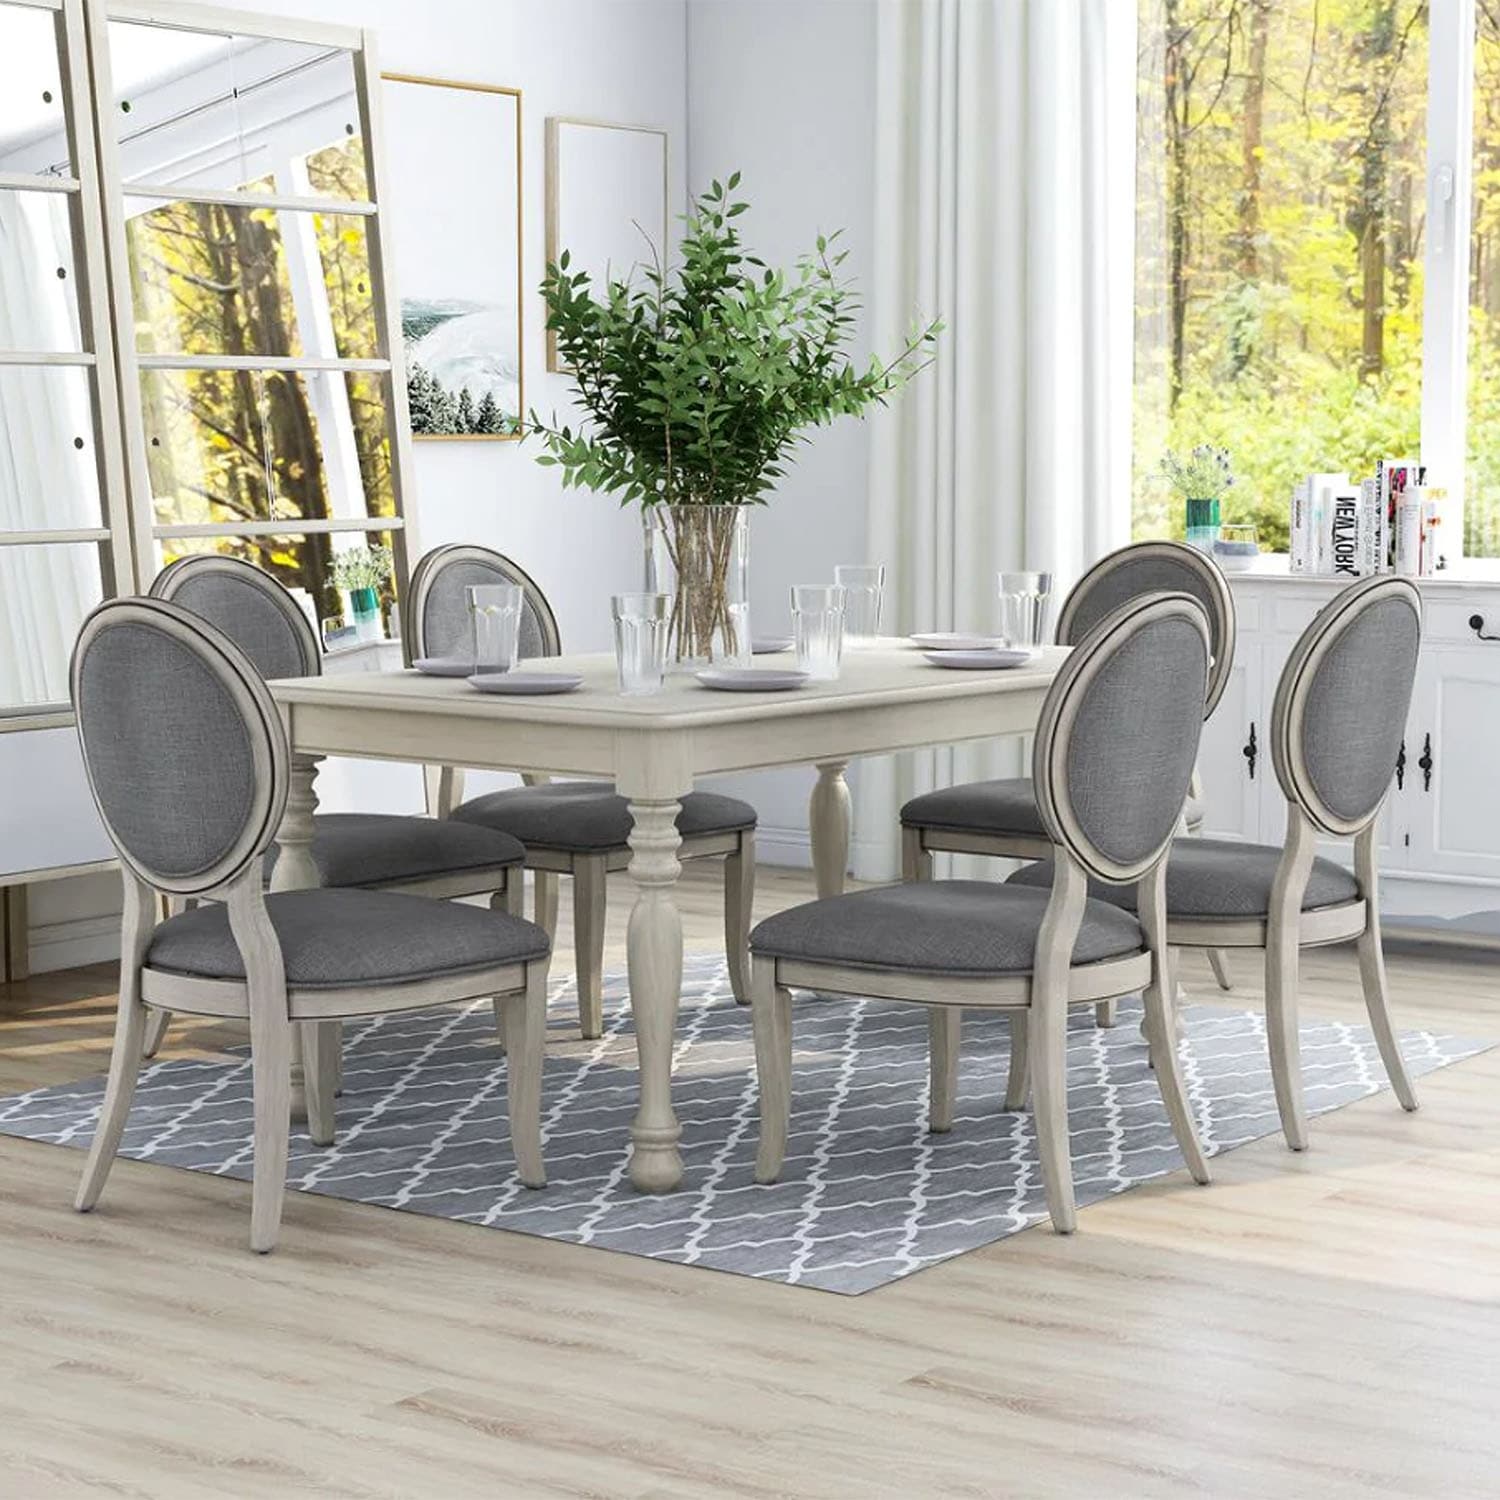 7 Piece Dining Set in Antique White and Gray Finish